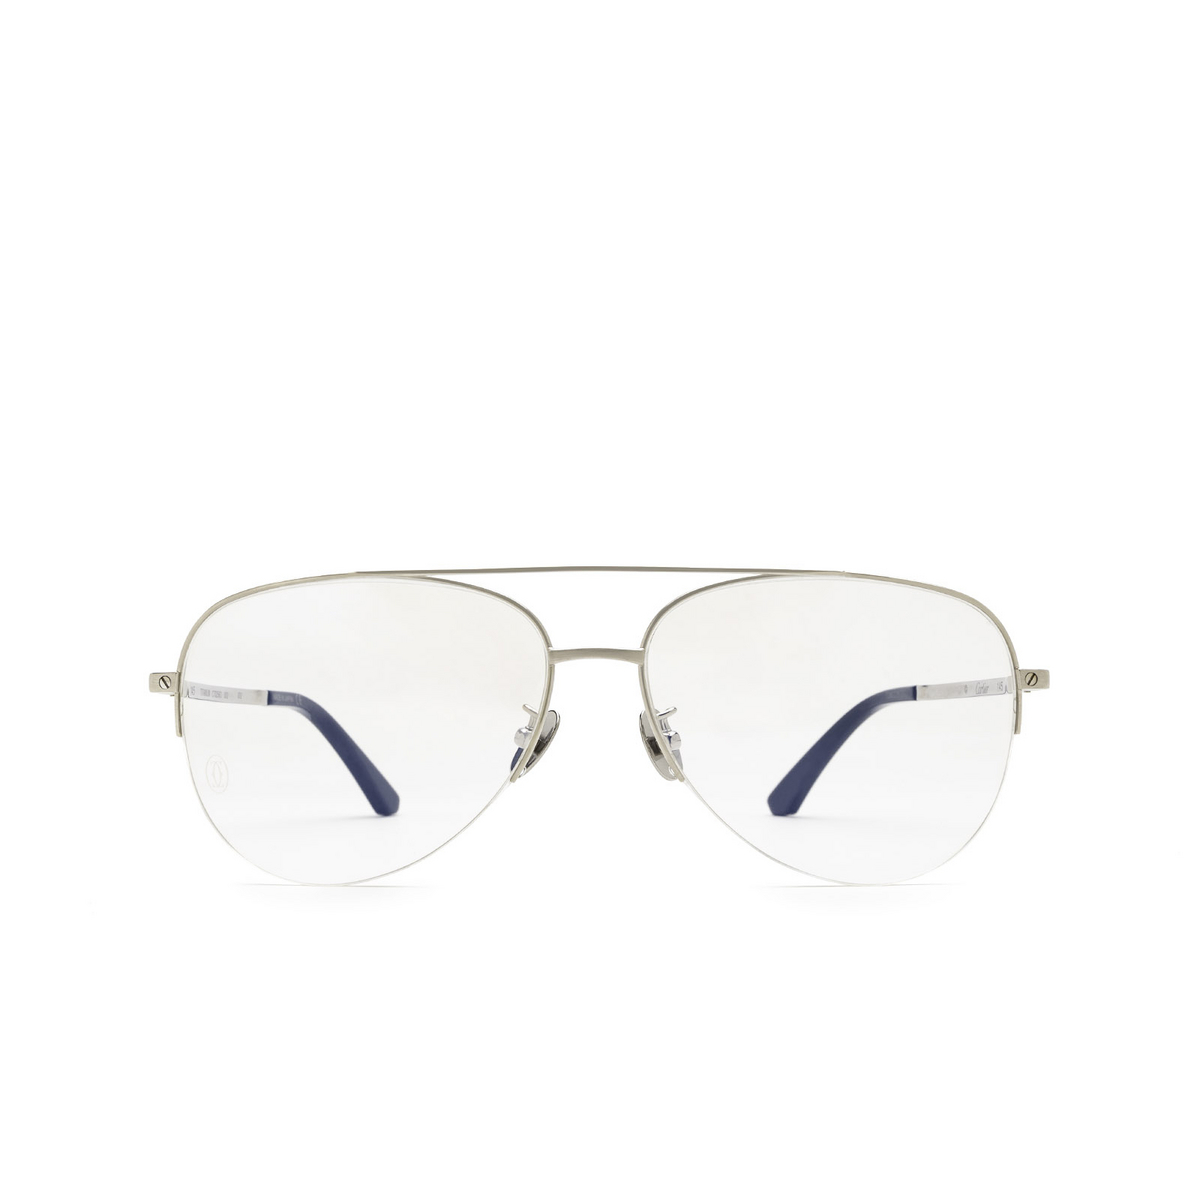 Cartier® Aviator Eyeglasses: CT0256O color Silver 002 - front view.